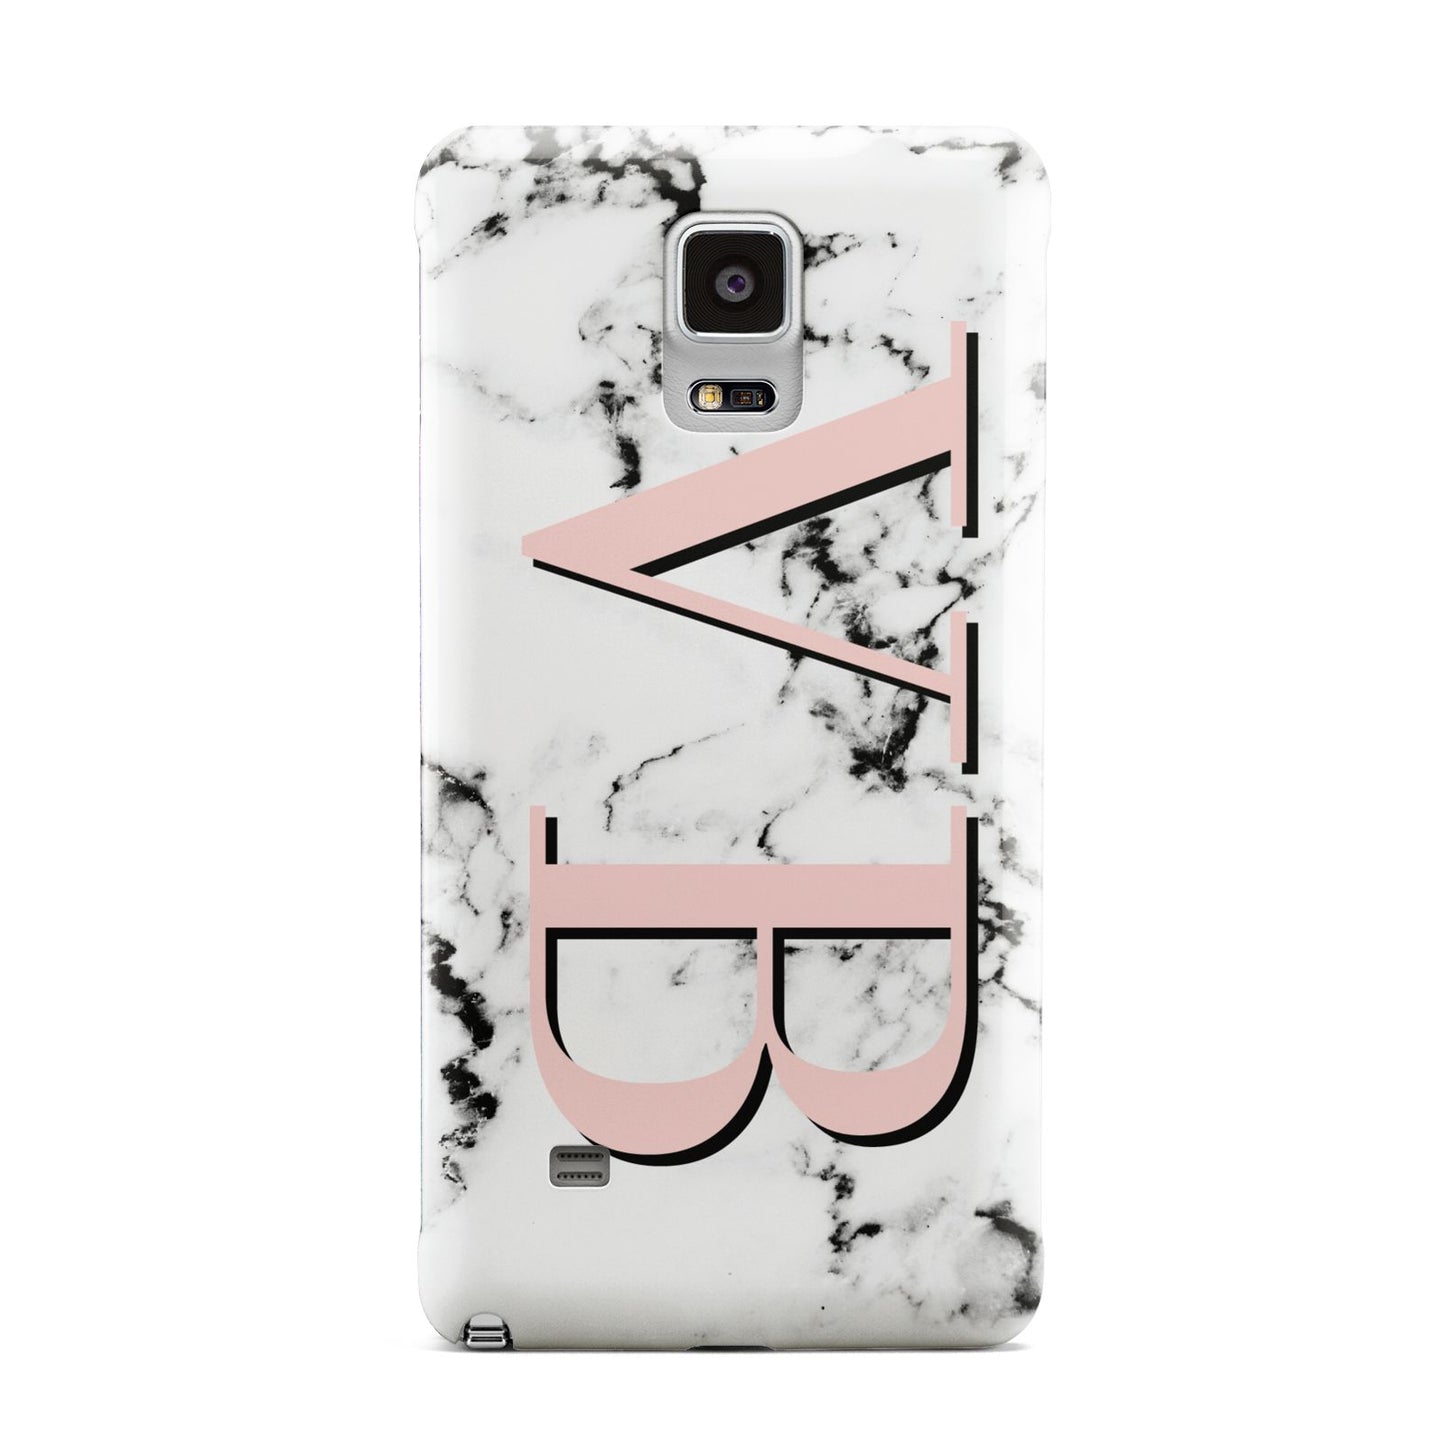 Personalised Coral Malble Initials Samsung Galaxy Note 4 Case